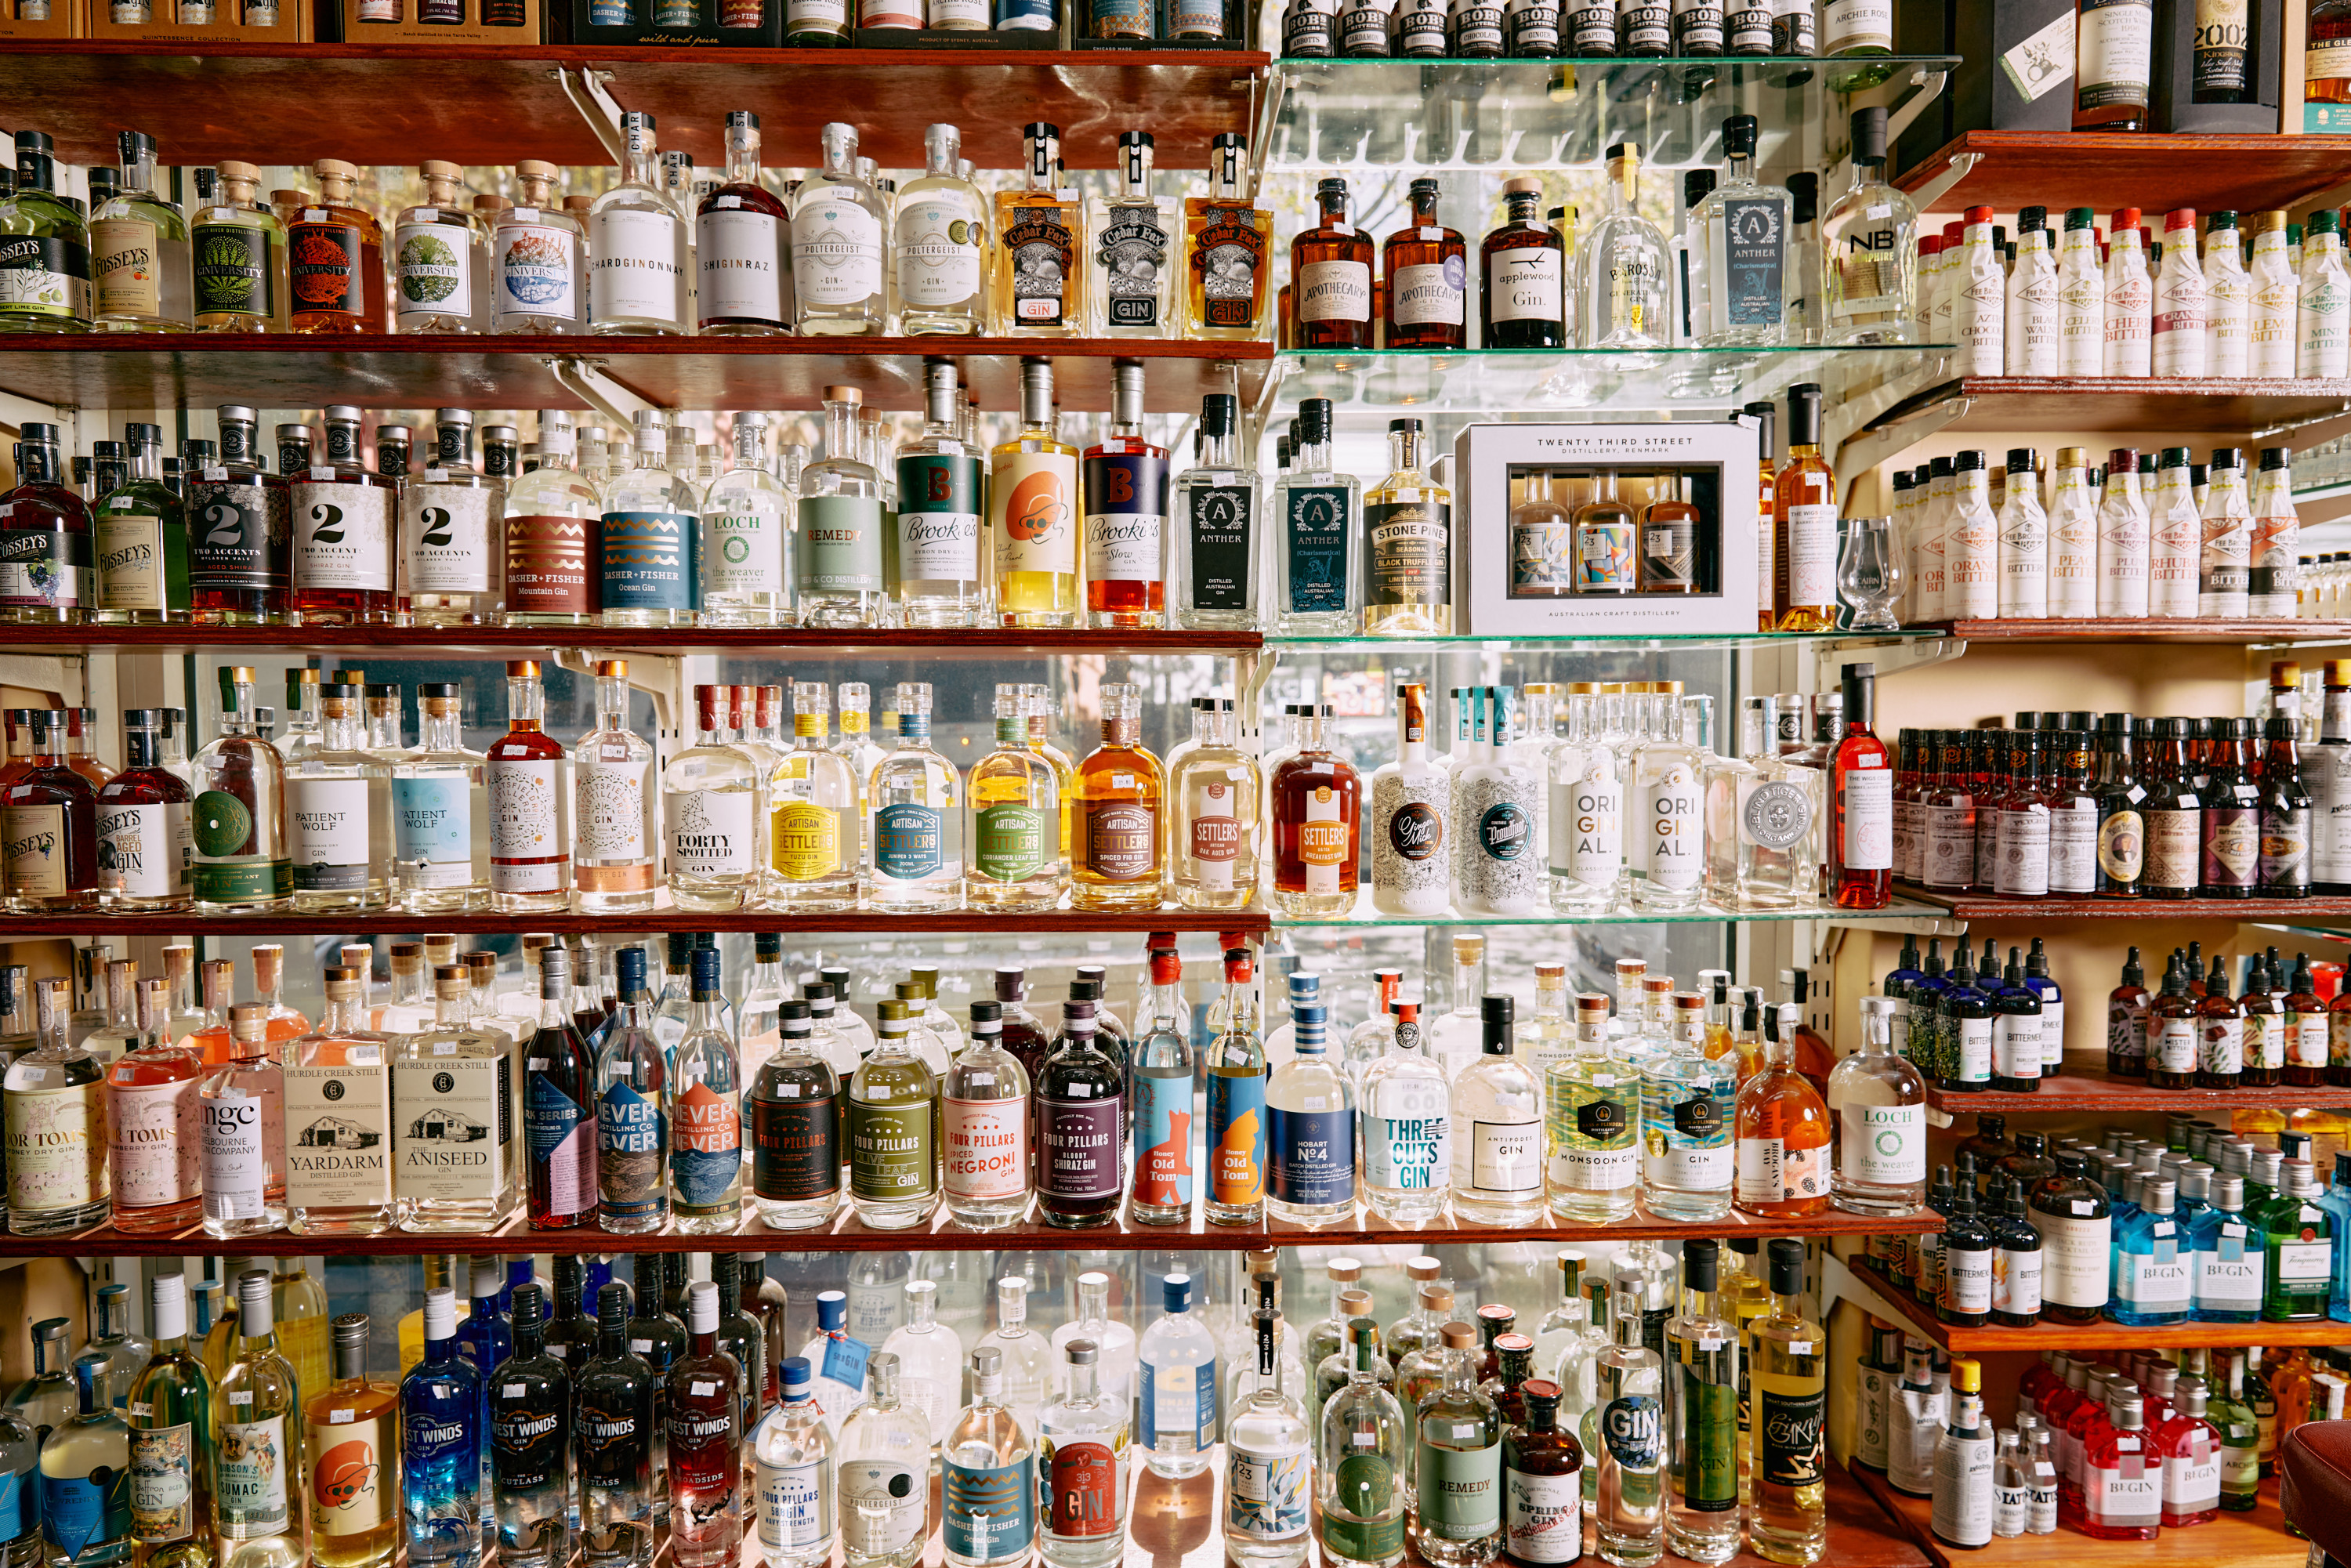 Several shelves stacked with fine liquor